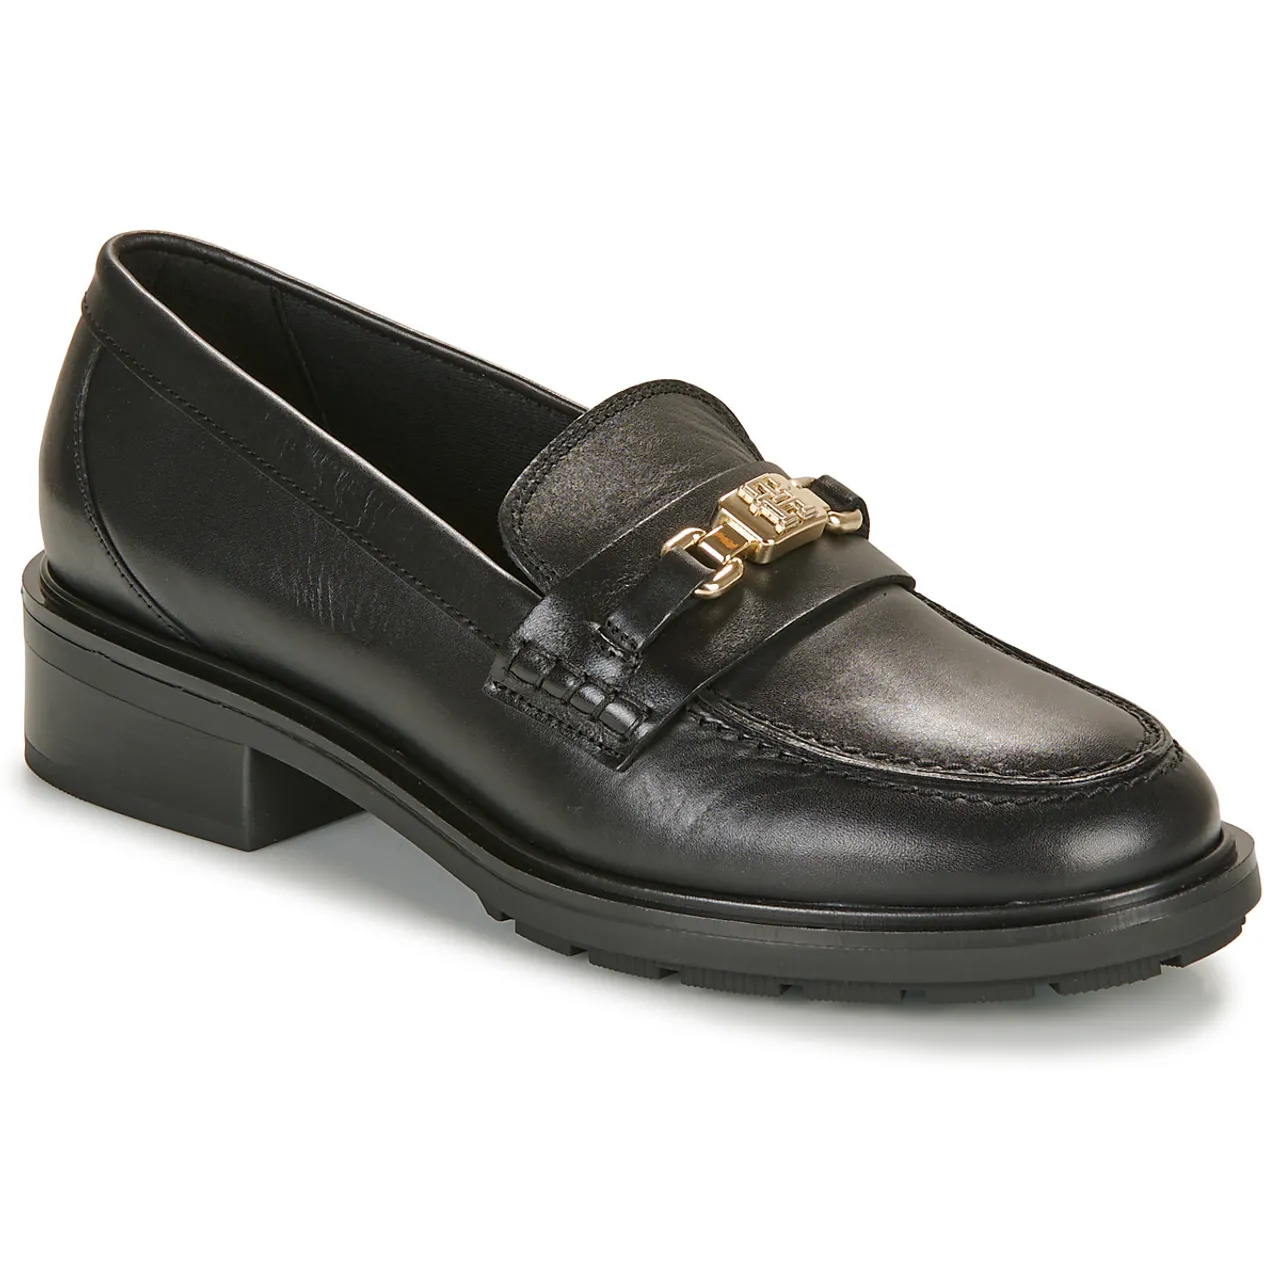 Tommy Hilfiger  TH HARDWARE LOAFER  women's Loafers / Casual Shoes in Black